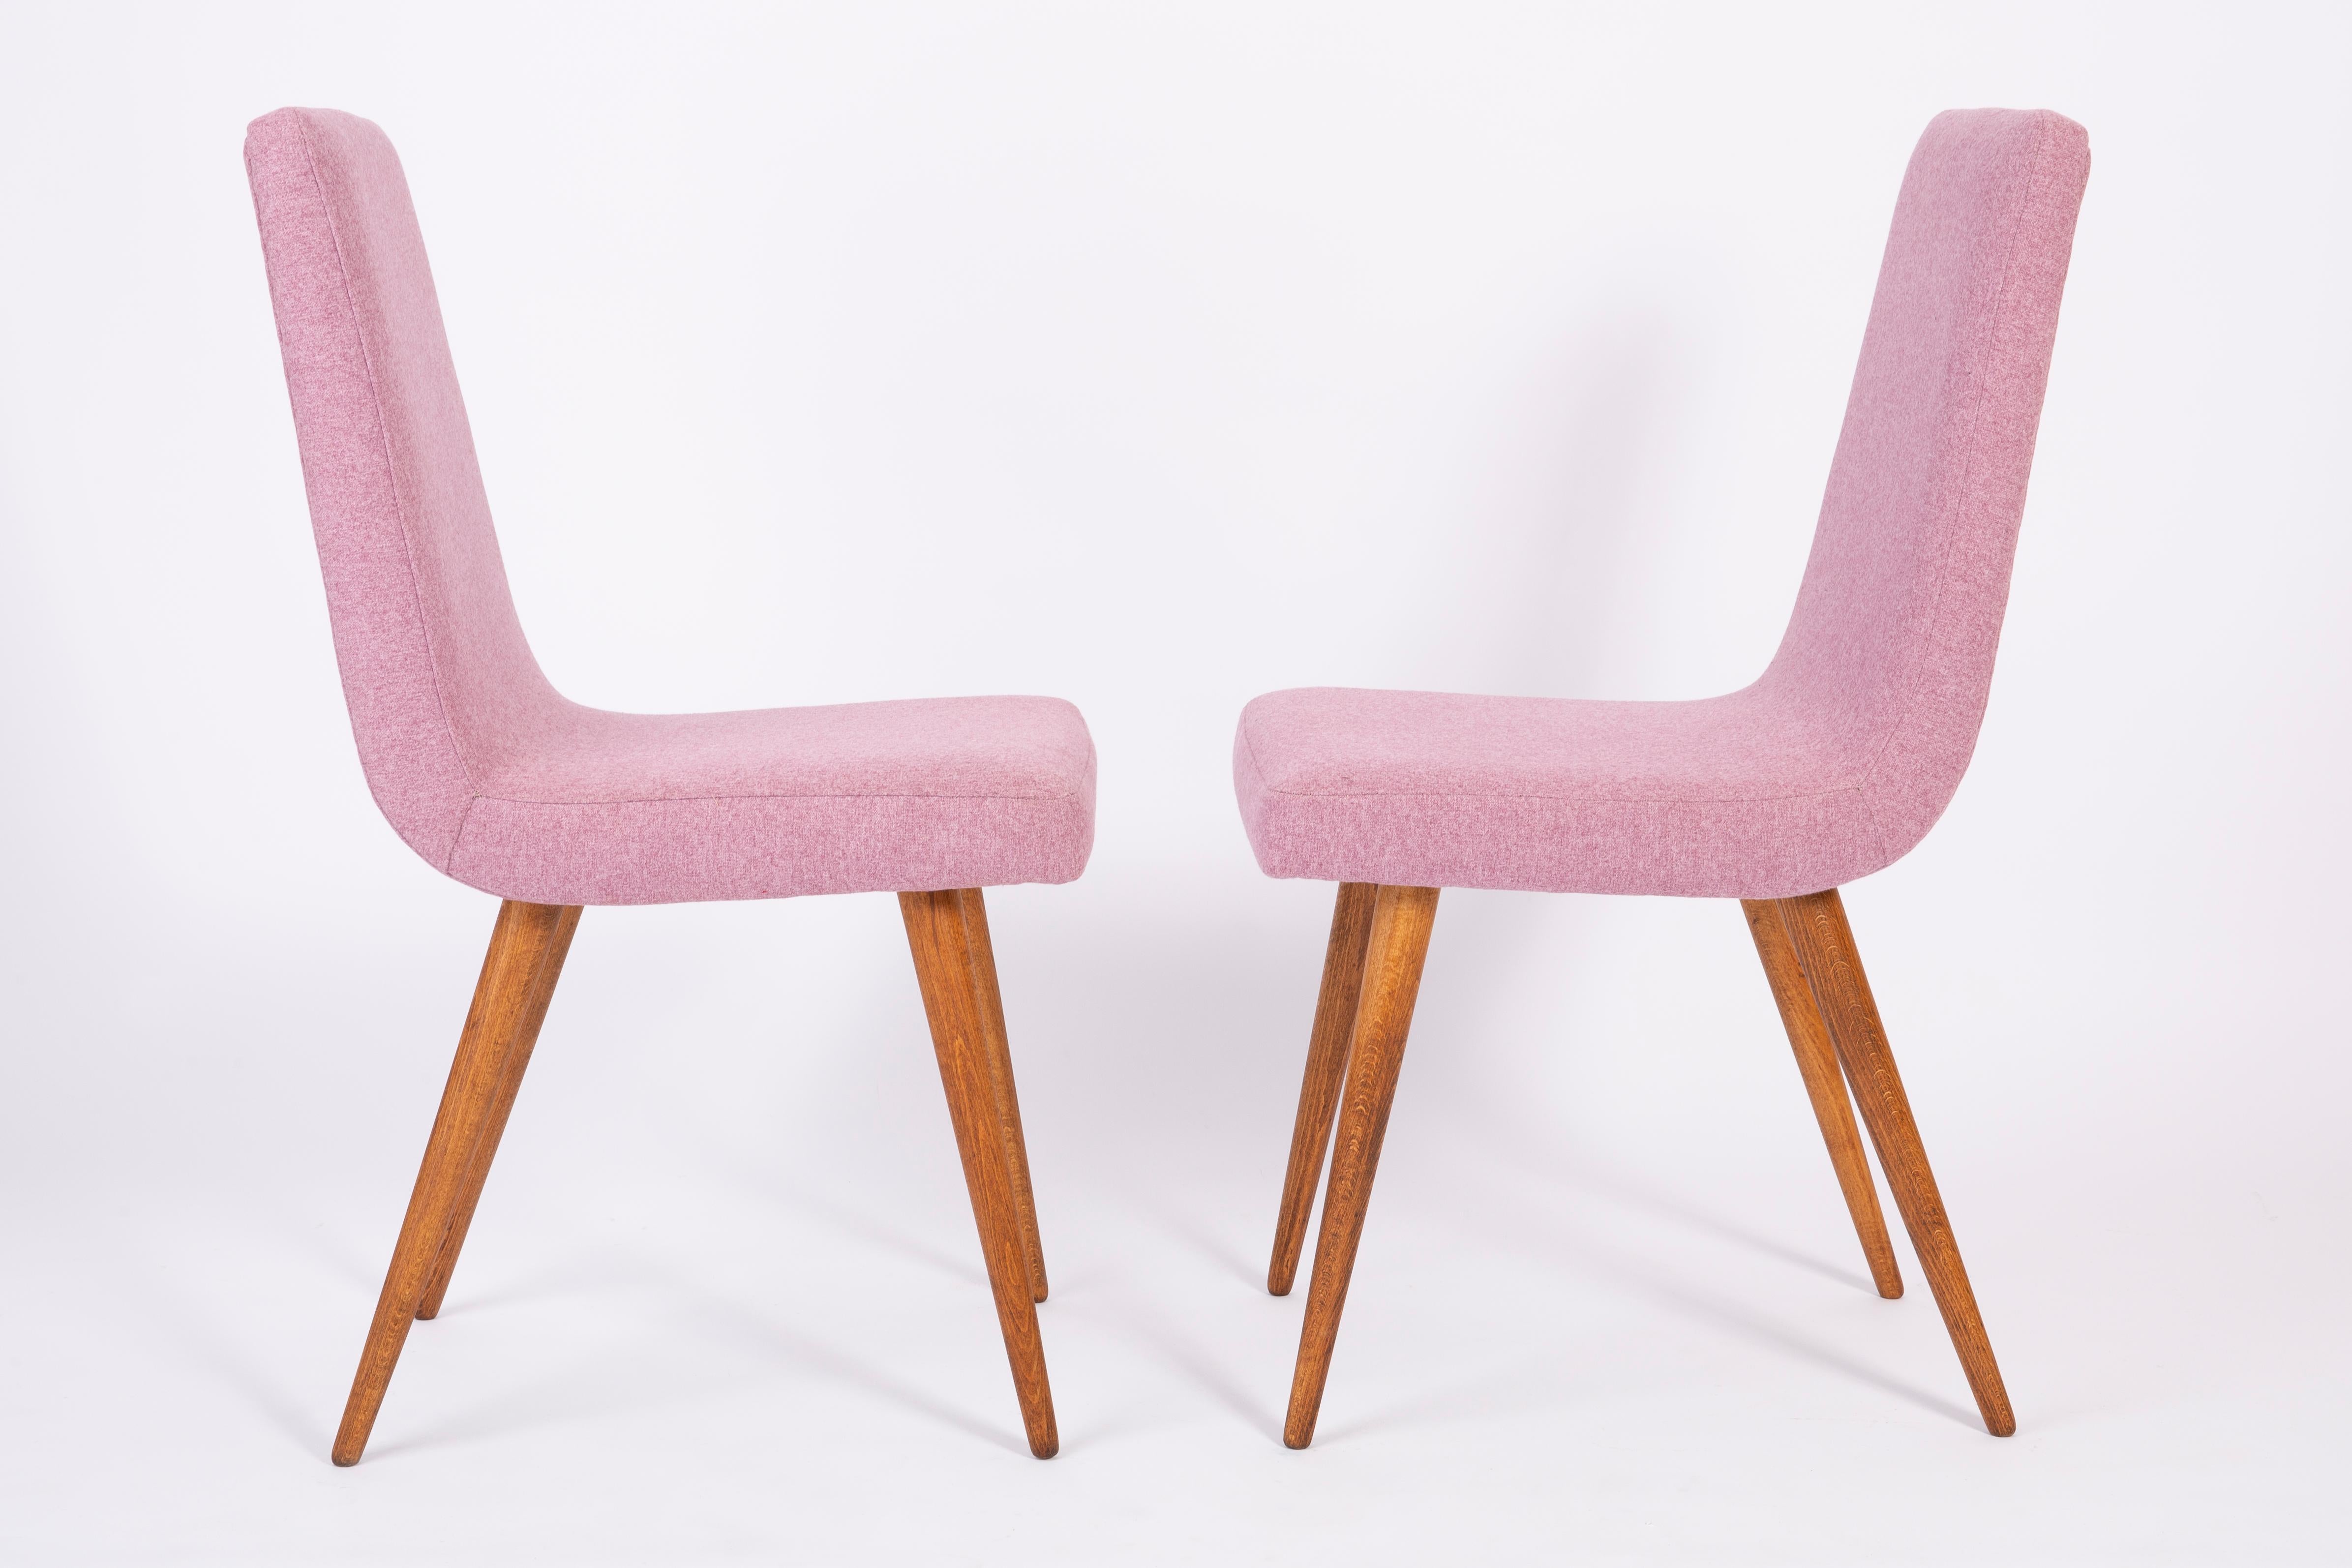 Chairs designed by Prof. Rajmund Halas. They have been made of beechwood. They have undergone a complete upholstery renovation, the woodwork has been cleaned and refreshed. We used matte varnish. Seats and backs were dressed in a pink mélange (color